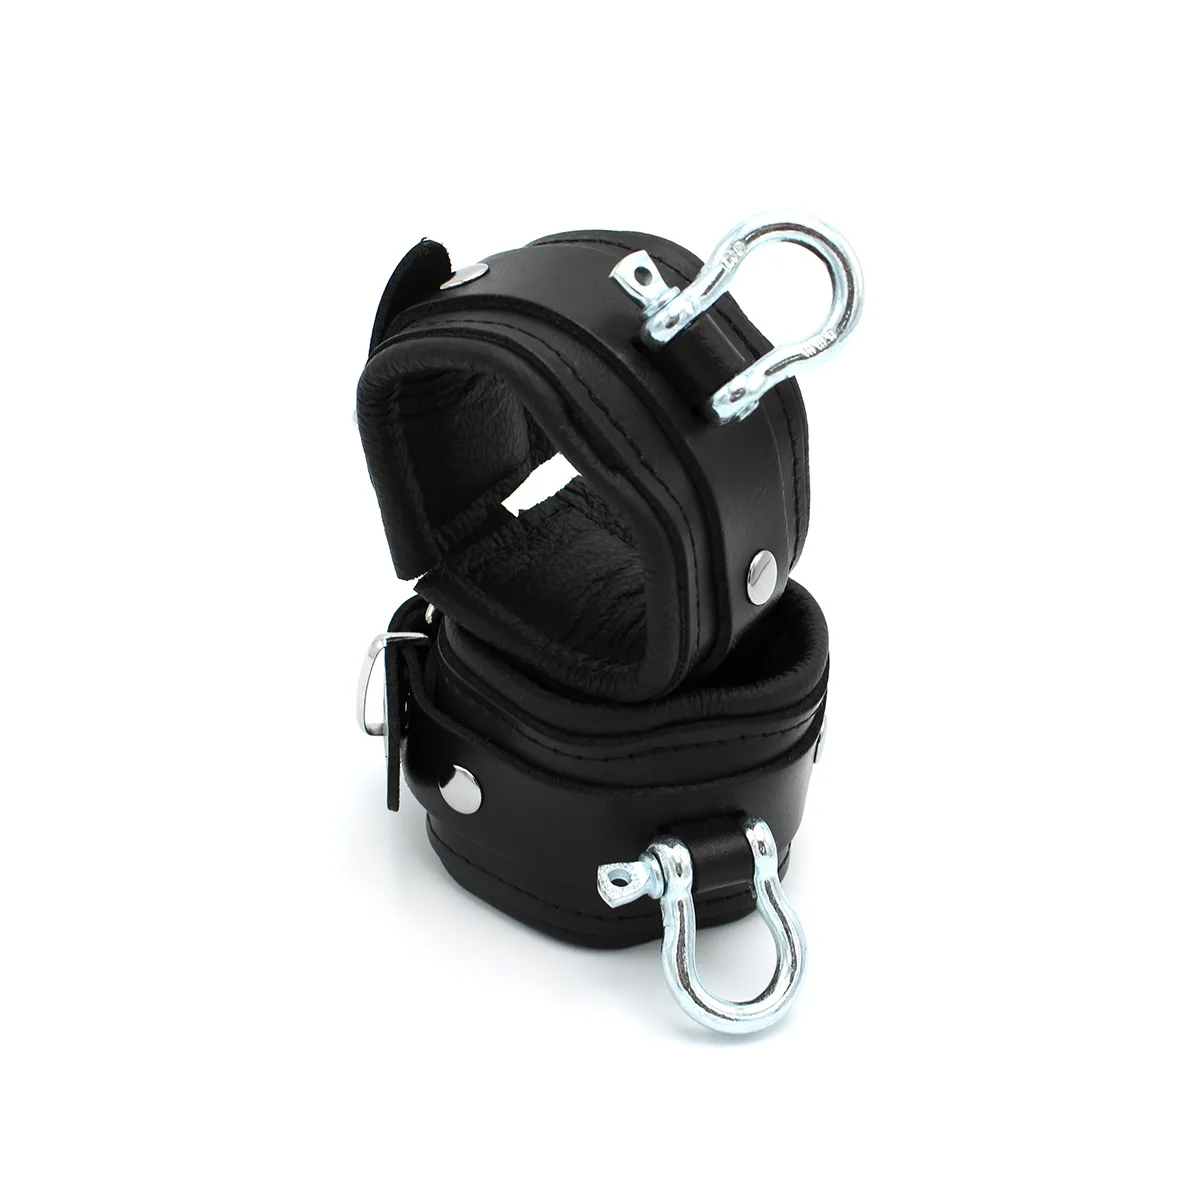 Leather Handcuffs with Metal Shackle